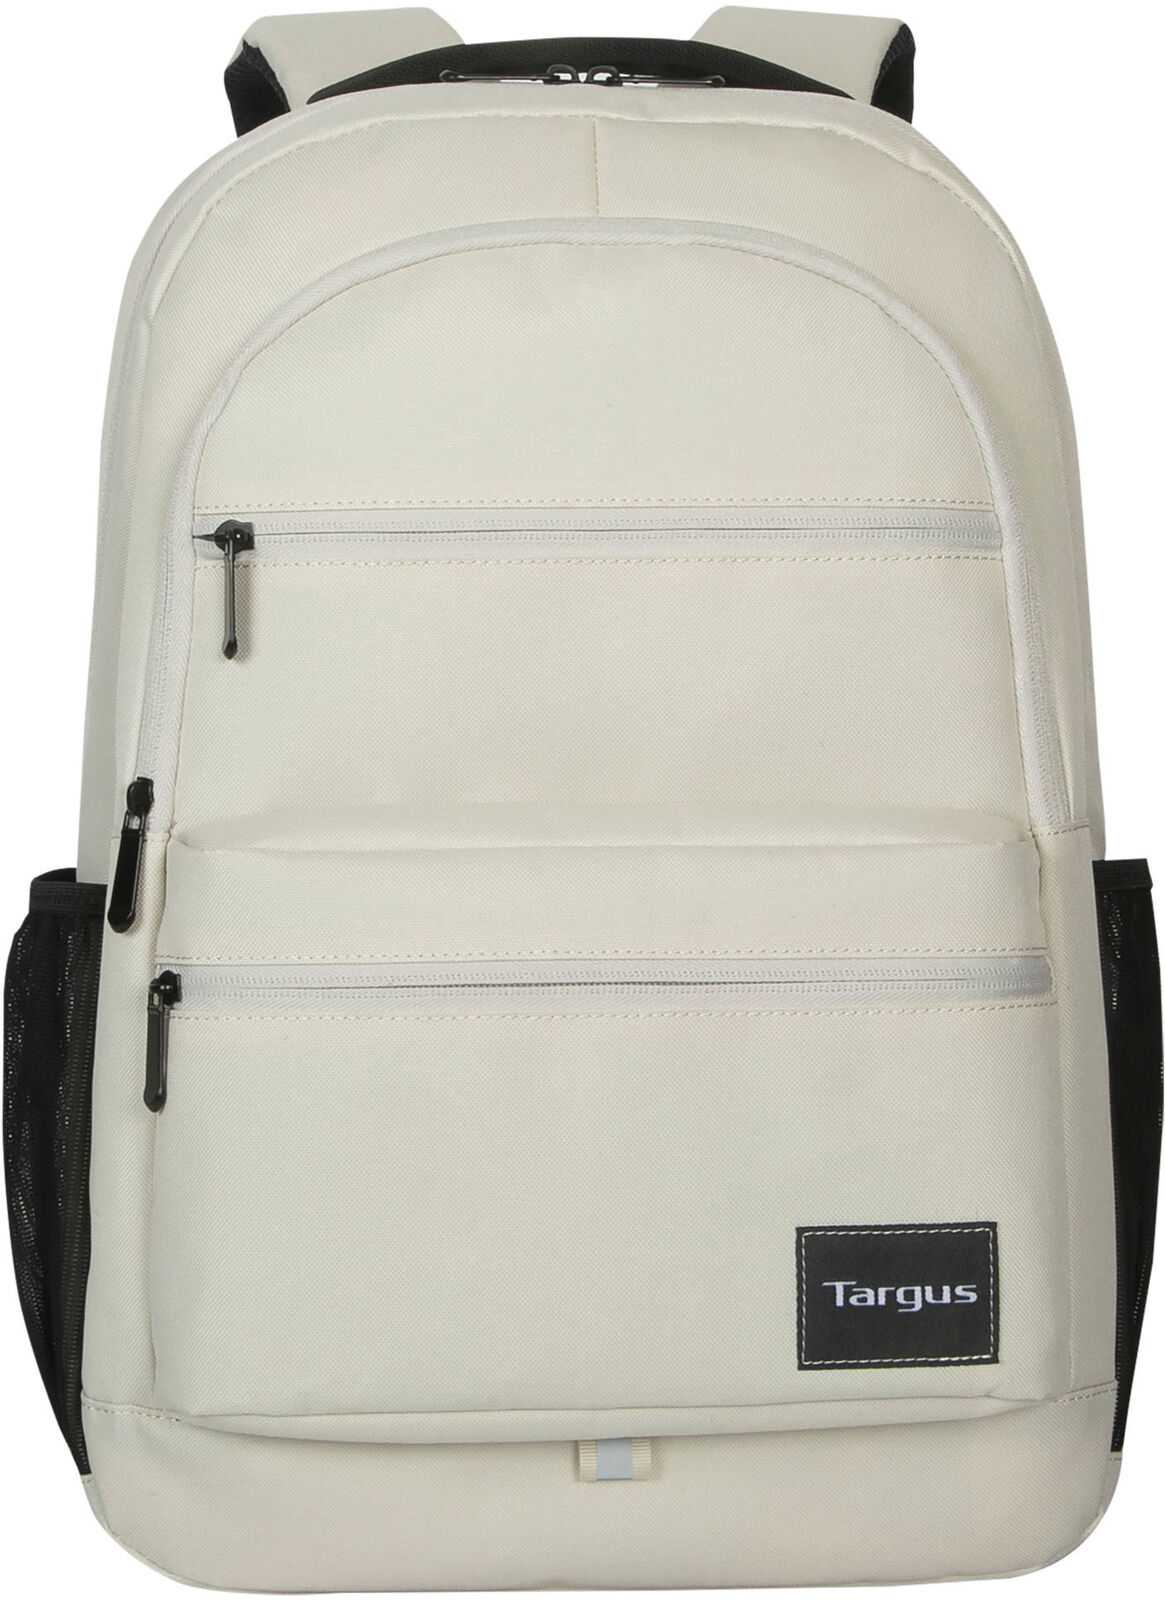 Targus - Octave III Backpack for 15.6Laptops - Papyrus